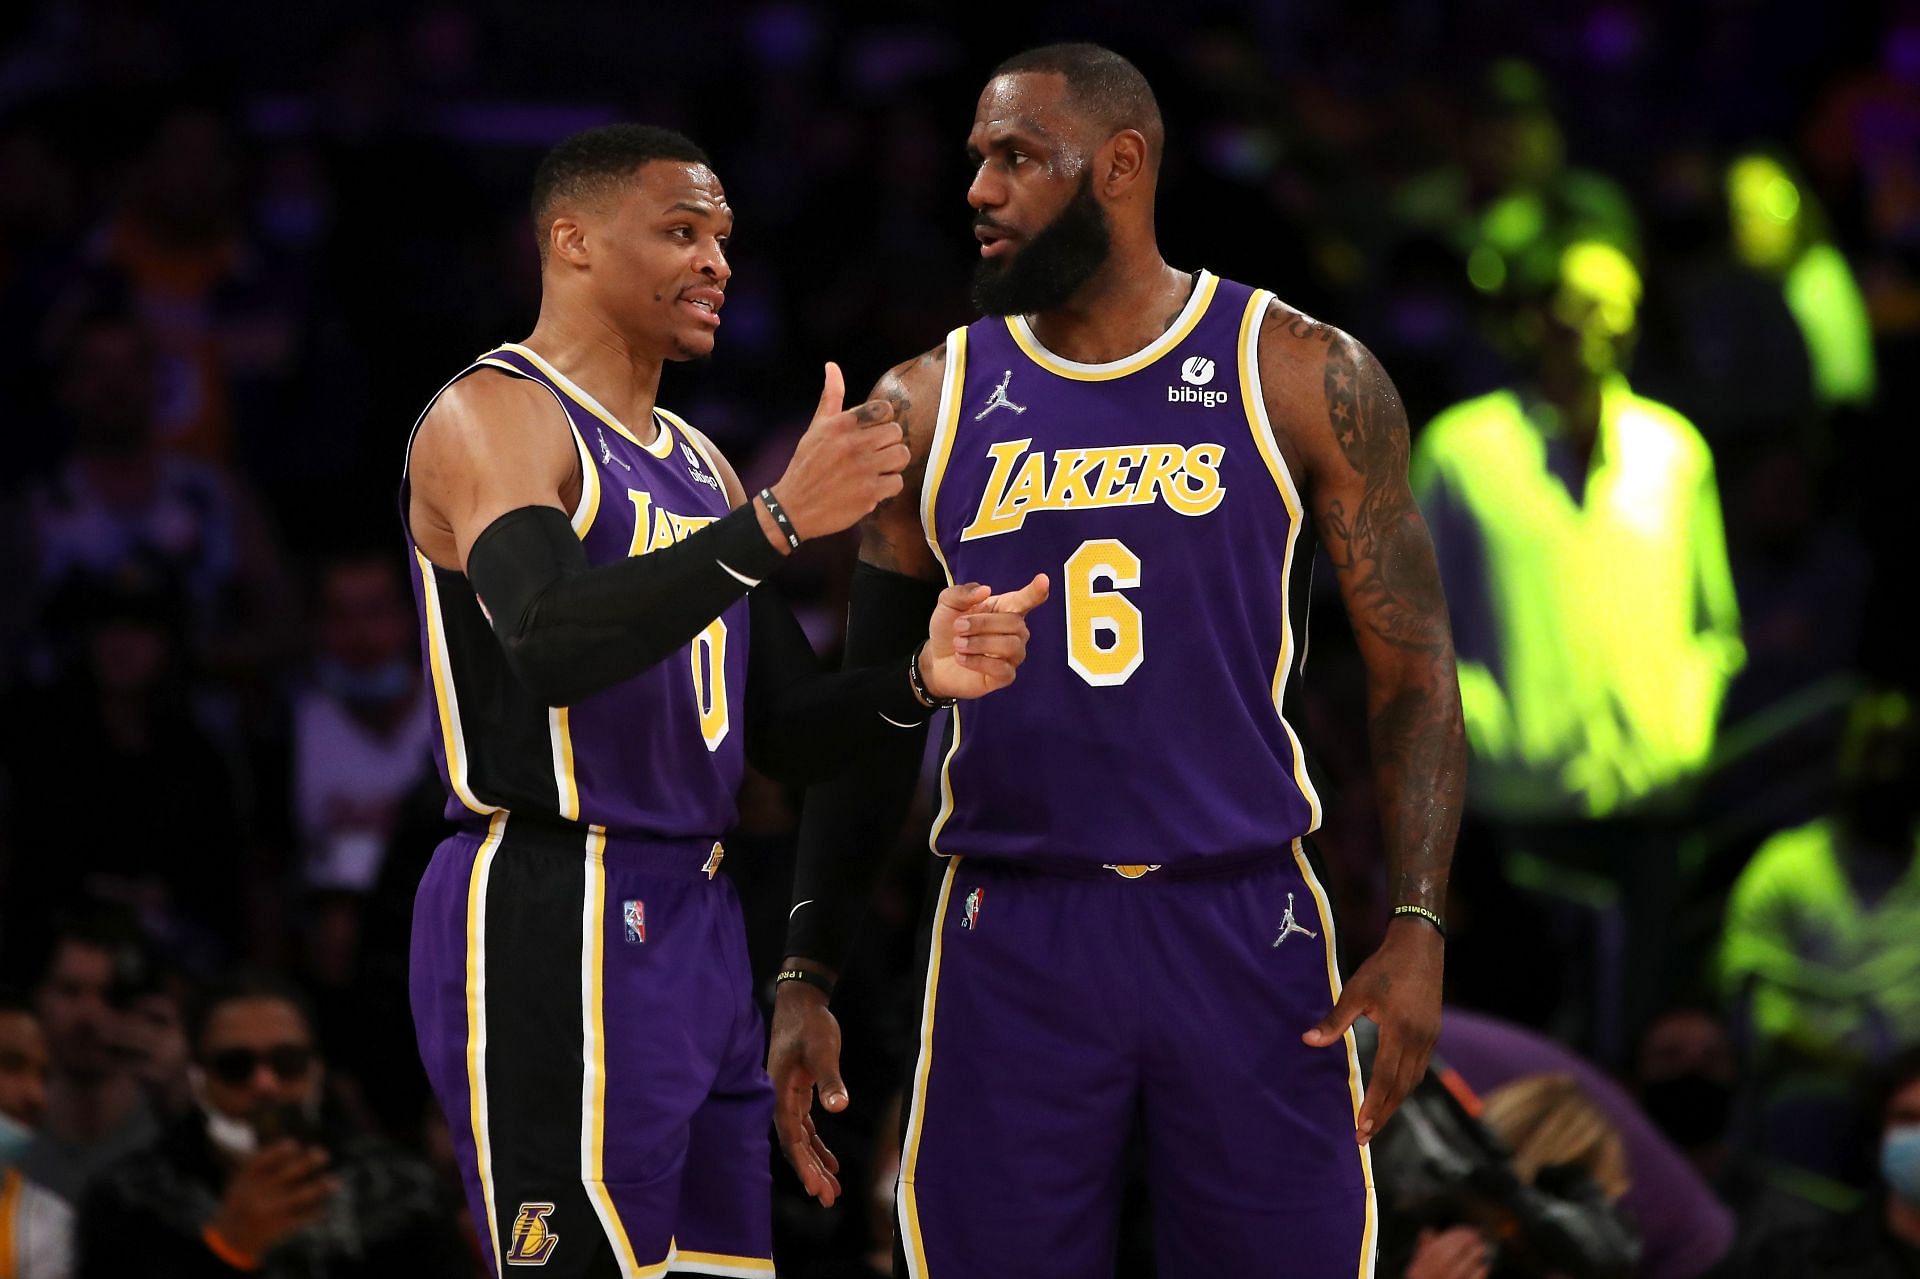 Expectations are high from the LA Lakers duo of LeBron James and Russell Westbrook.